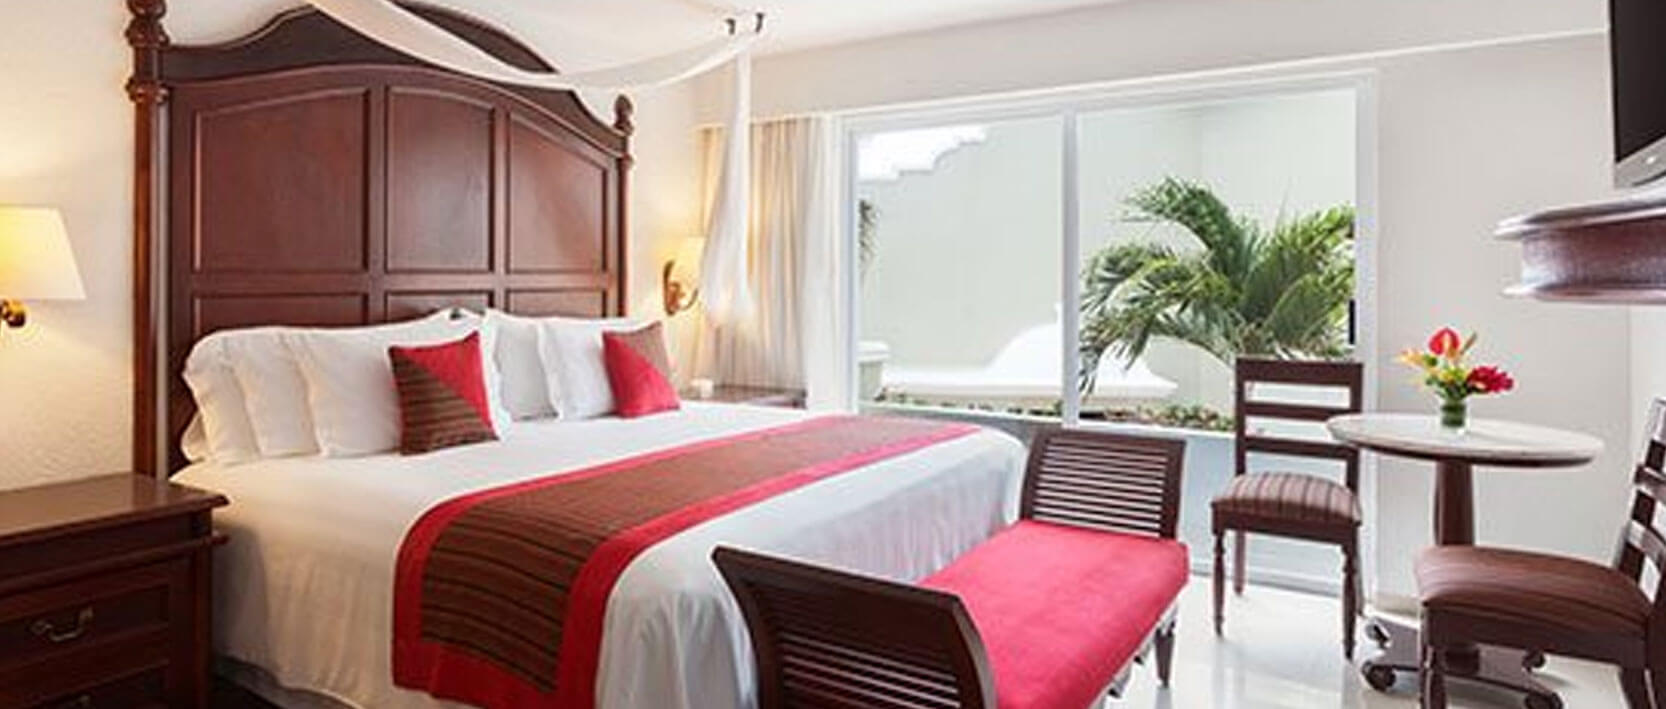 Gran Caribe Cancun Accommodations - Gran Master One-Bedroom Suite